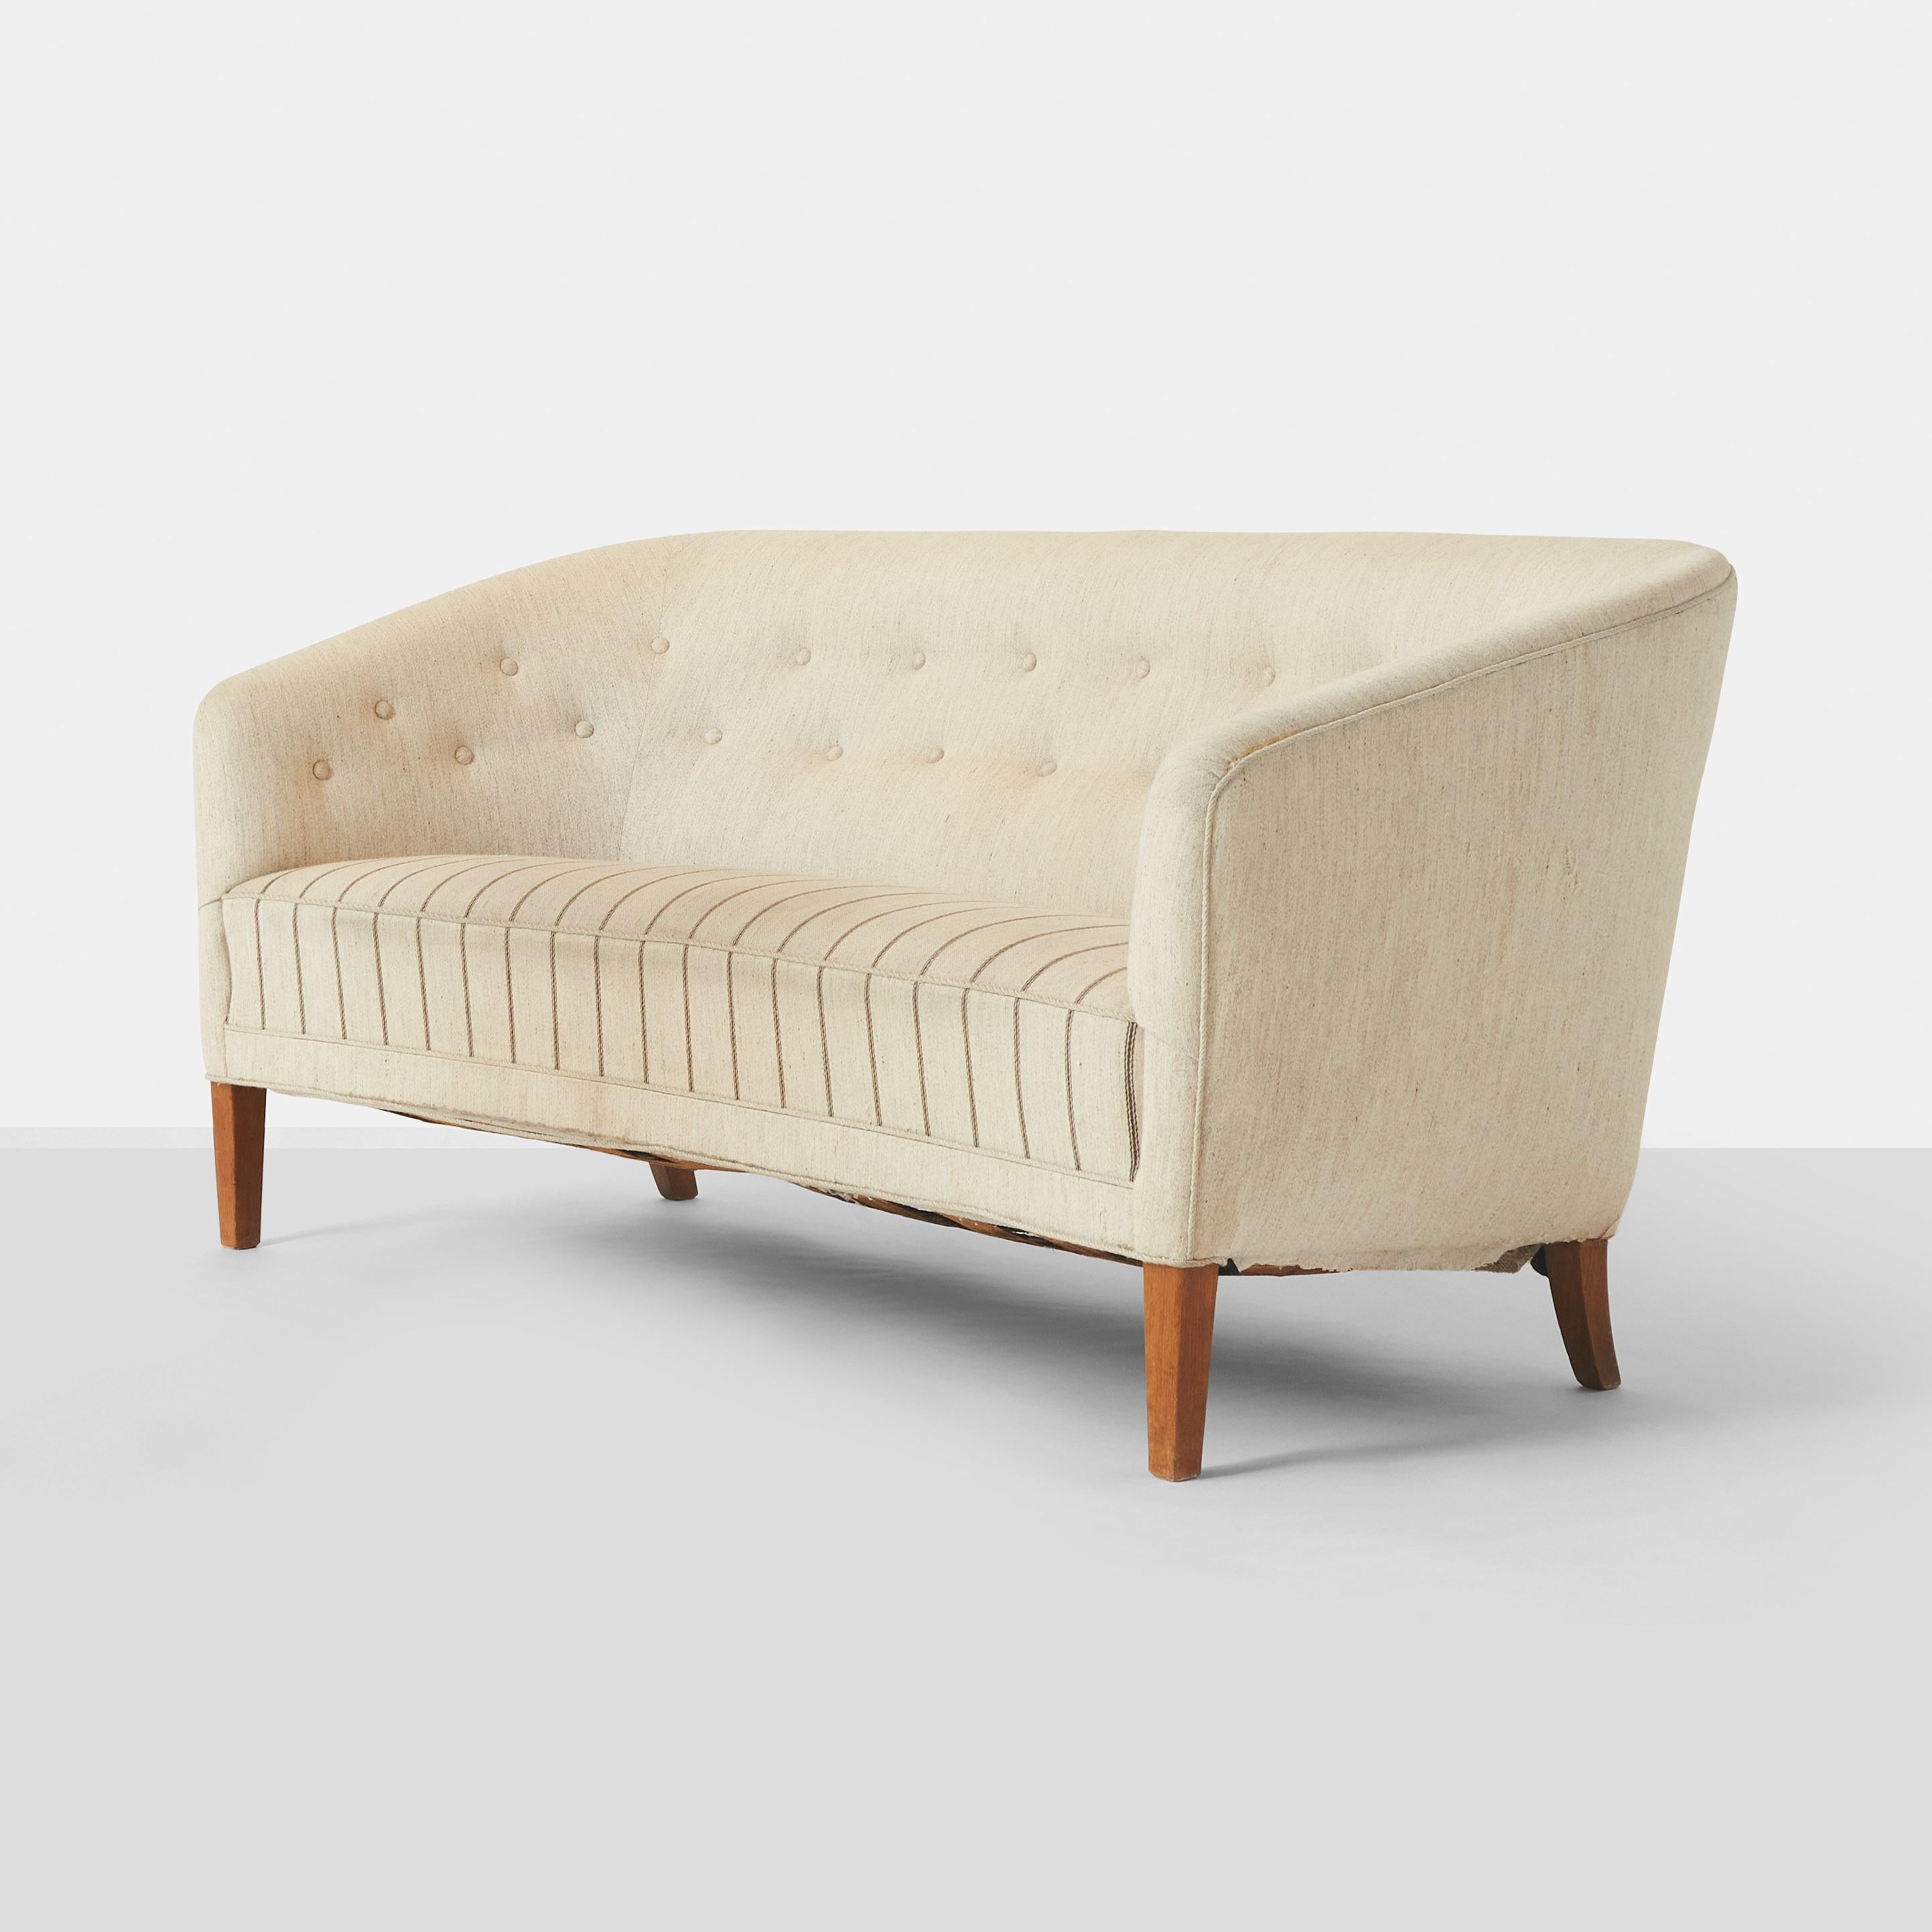 An elegant two seat sofa by Danish cabinetmaker Ludvig Pontoppidan. The sofa features curved edges and sloped arms, mahogany legs and upholstered seat, back and sides.